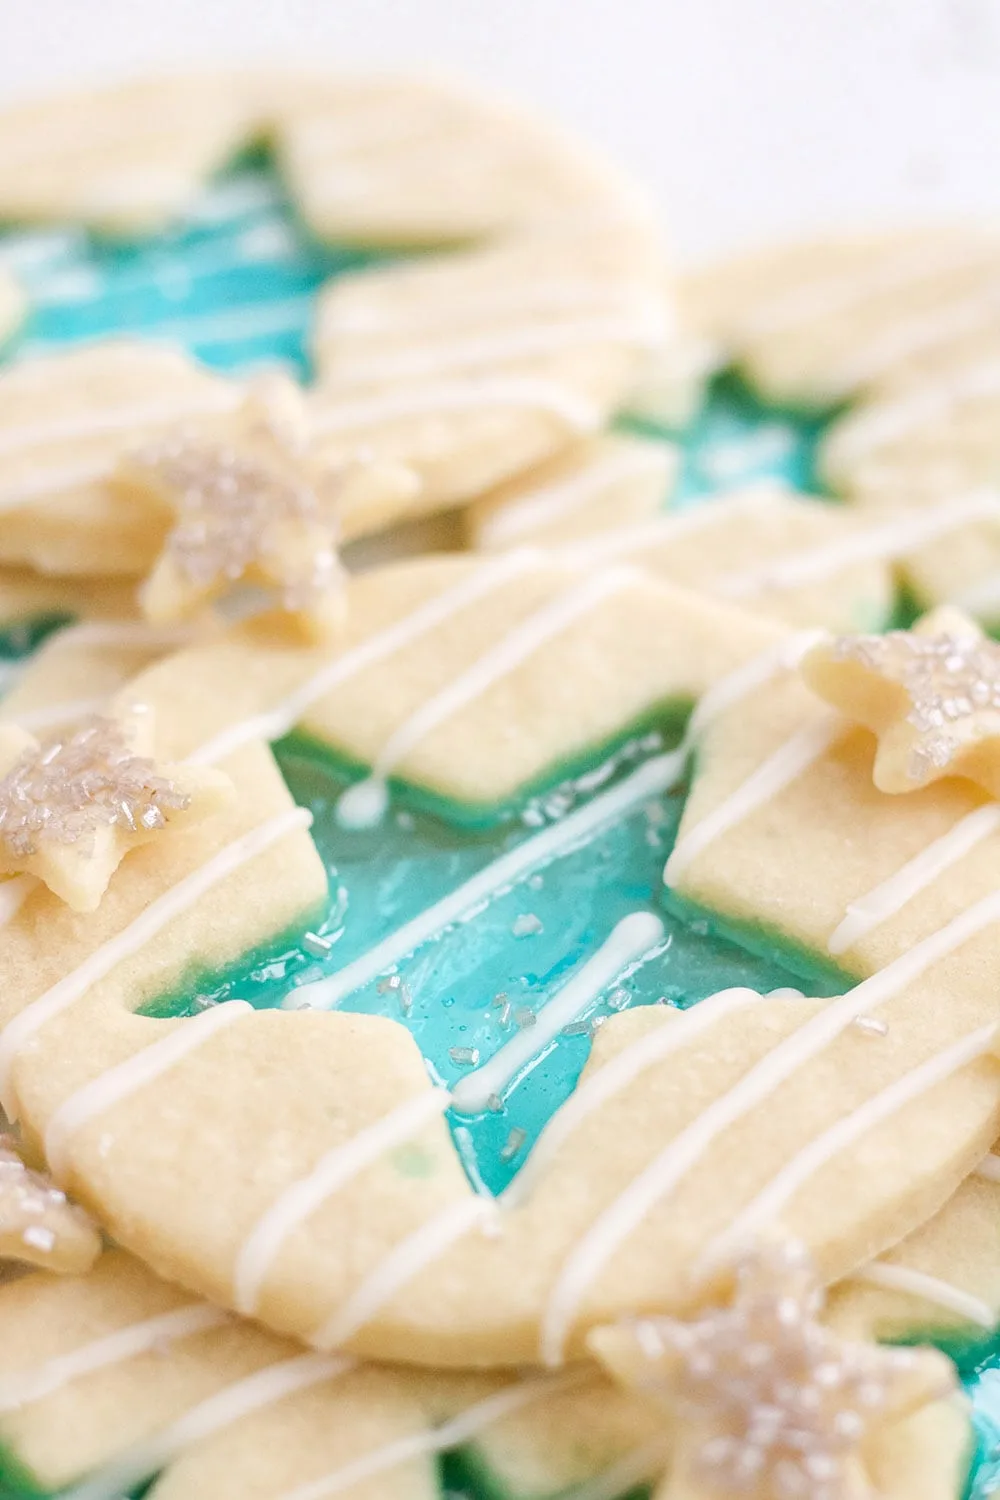 Jolly Rancher candy cookies with blue stars and white glaze.